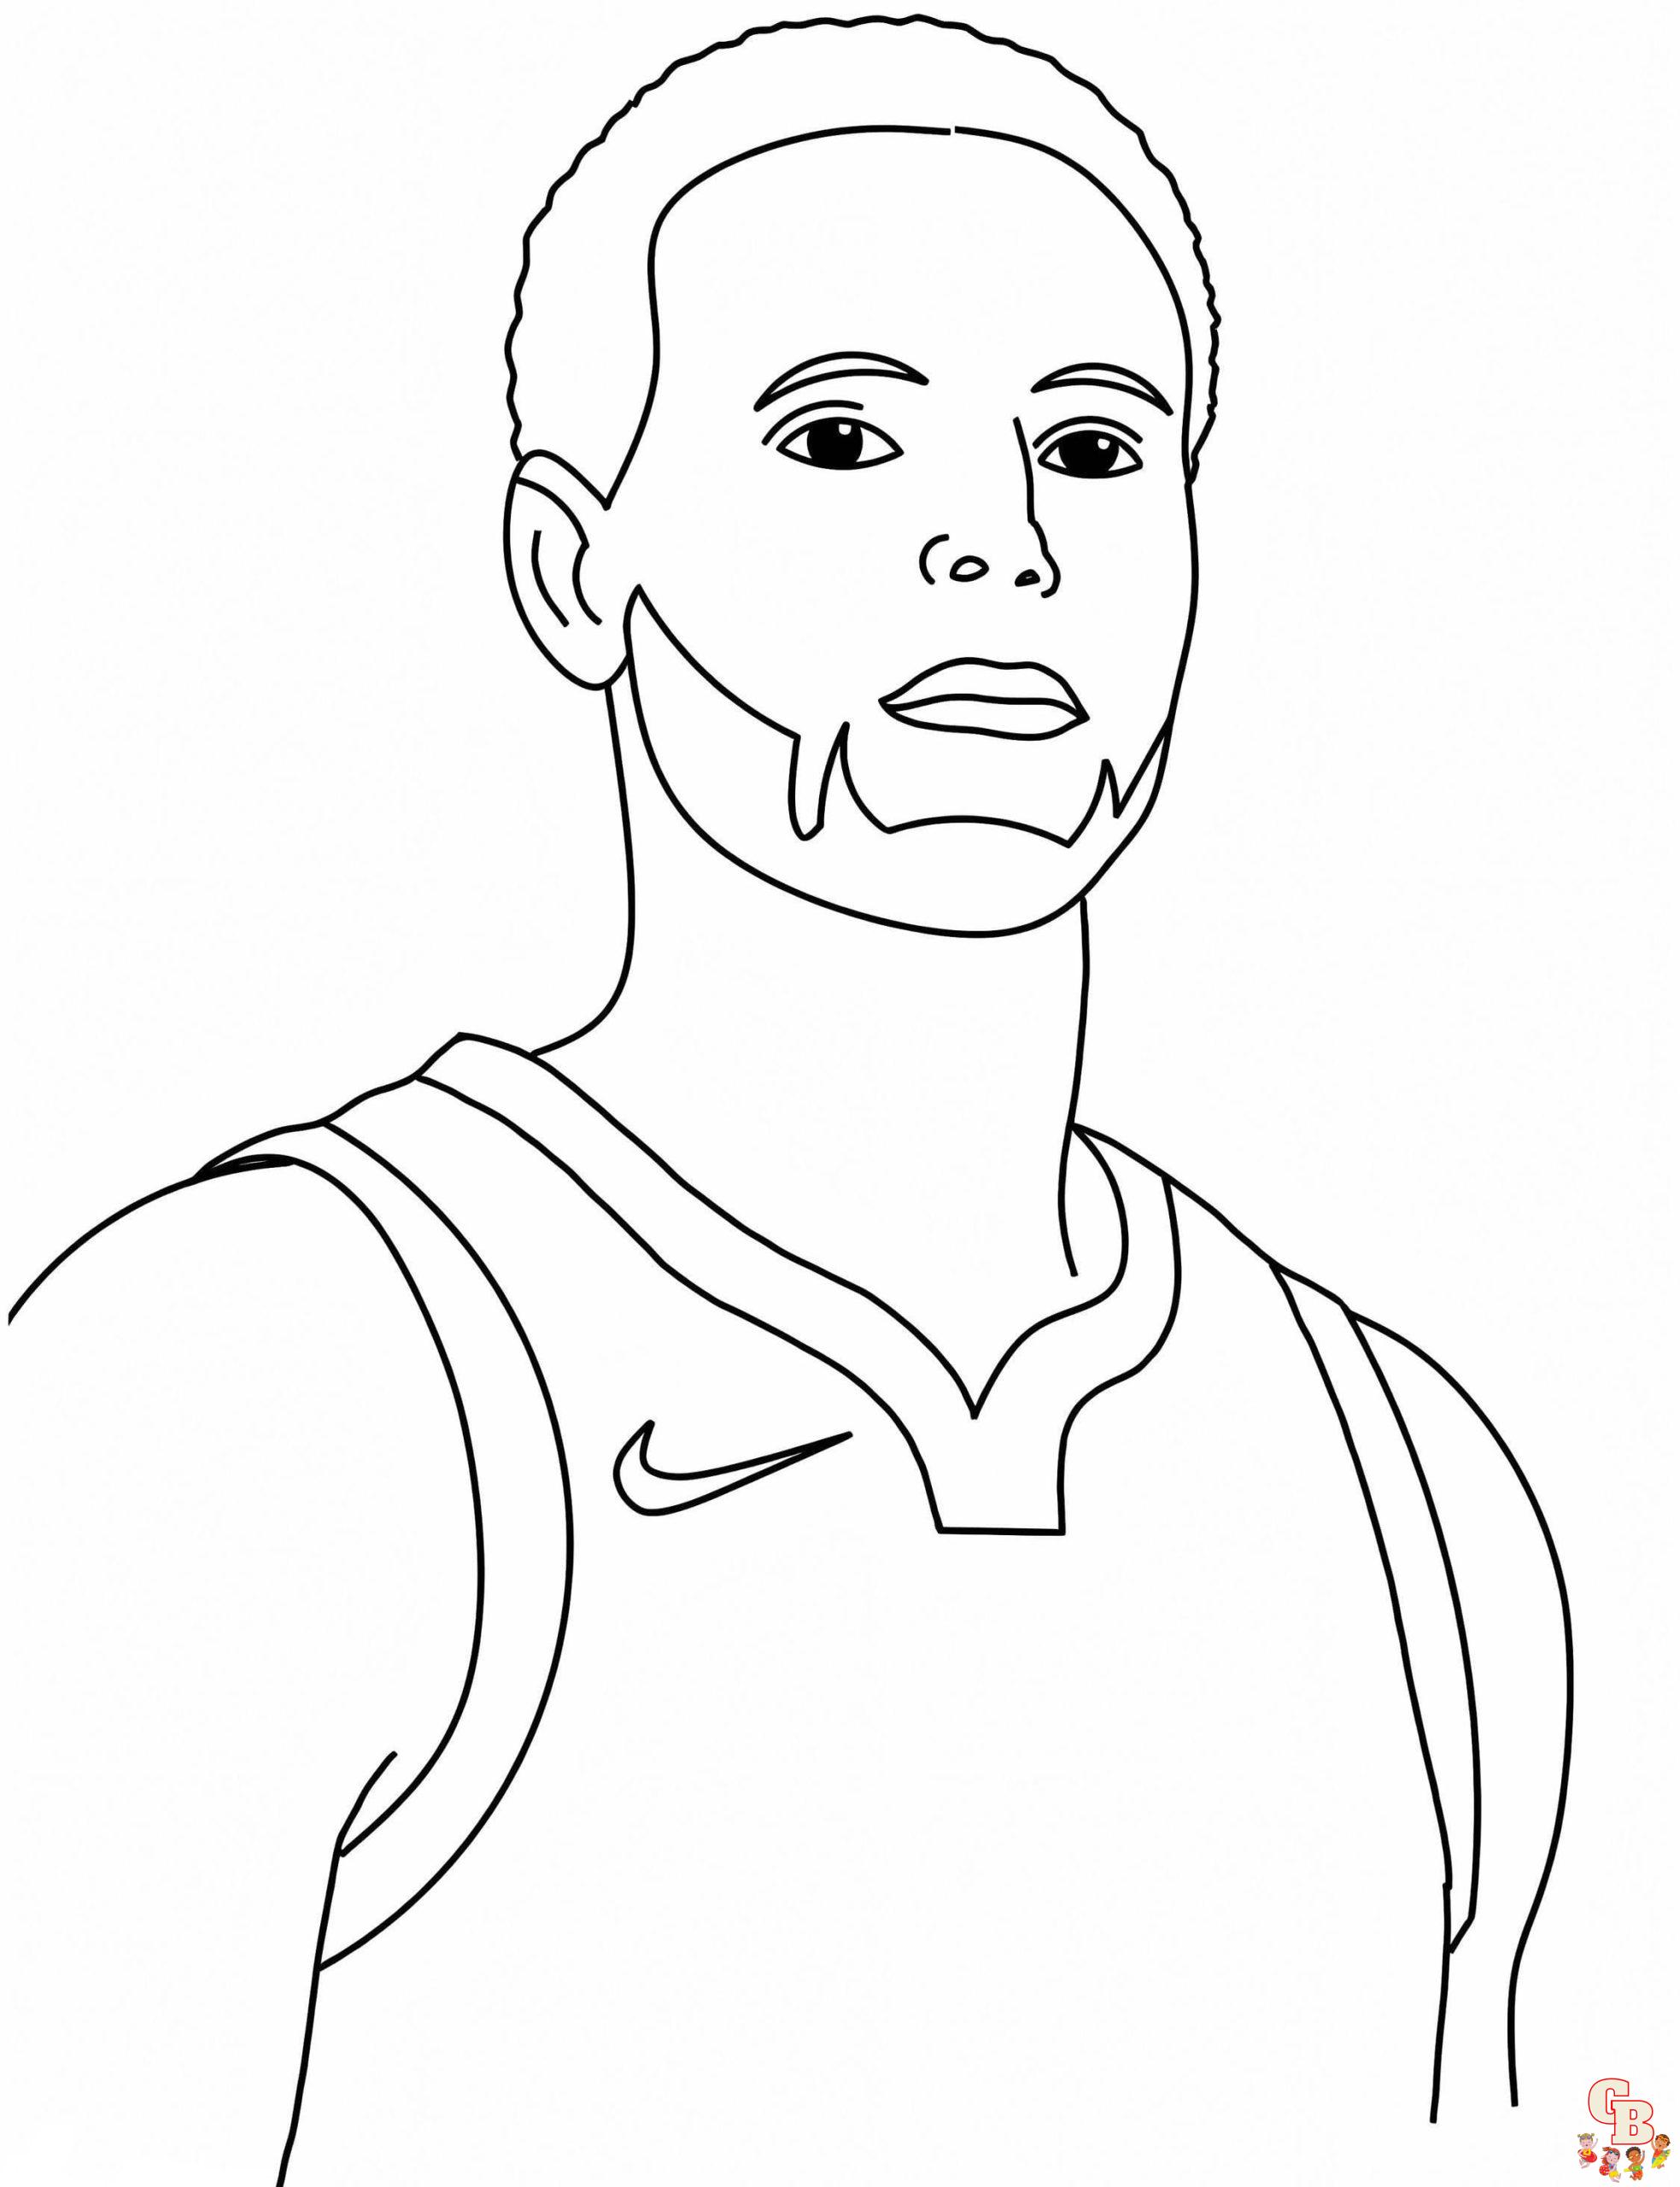 Stephen Curry Coloring Pages Printable  Sports coloring pages, Coloring  pages to print, Stephen curry